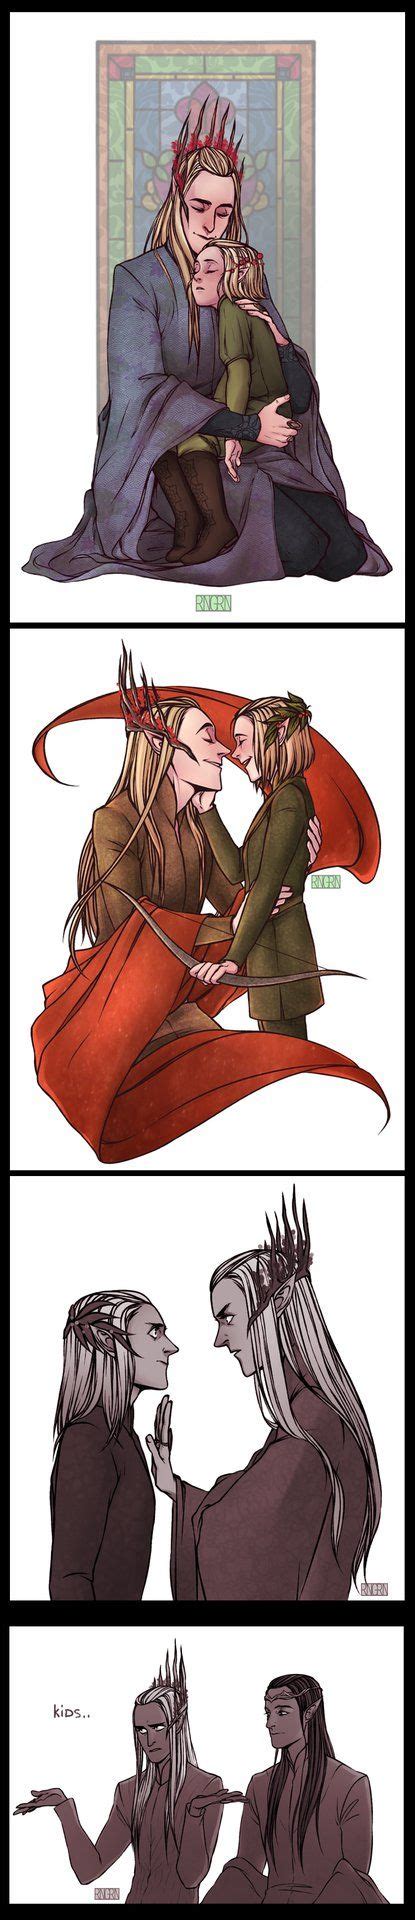 Father And Son And A Little Bit Of Elrond By Ringreen On Deviantart